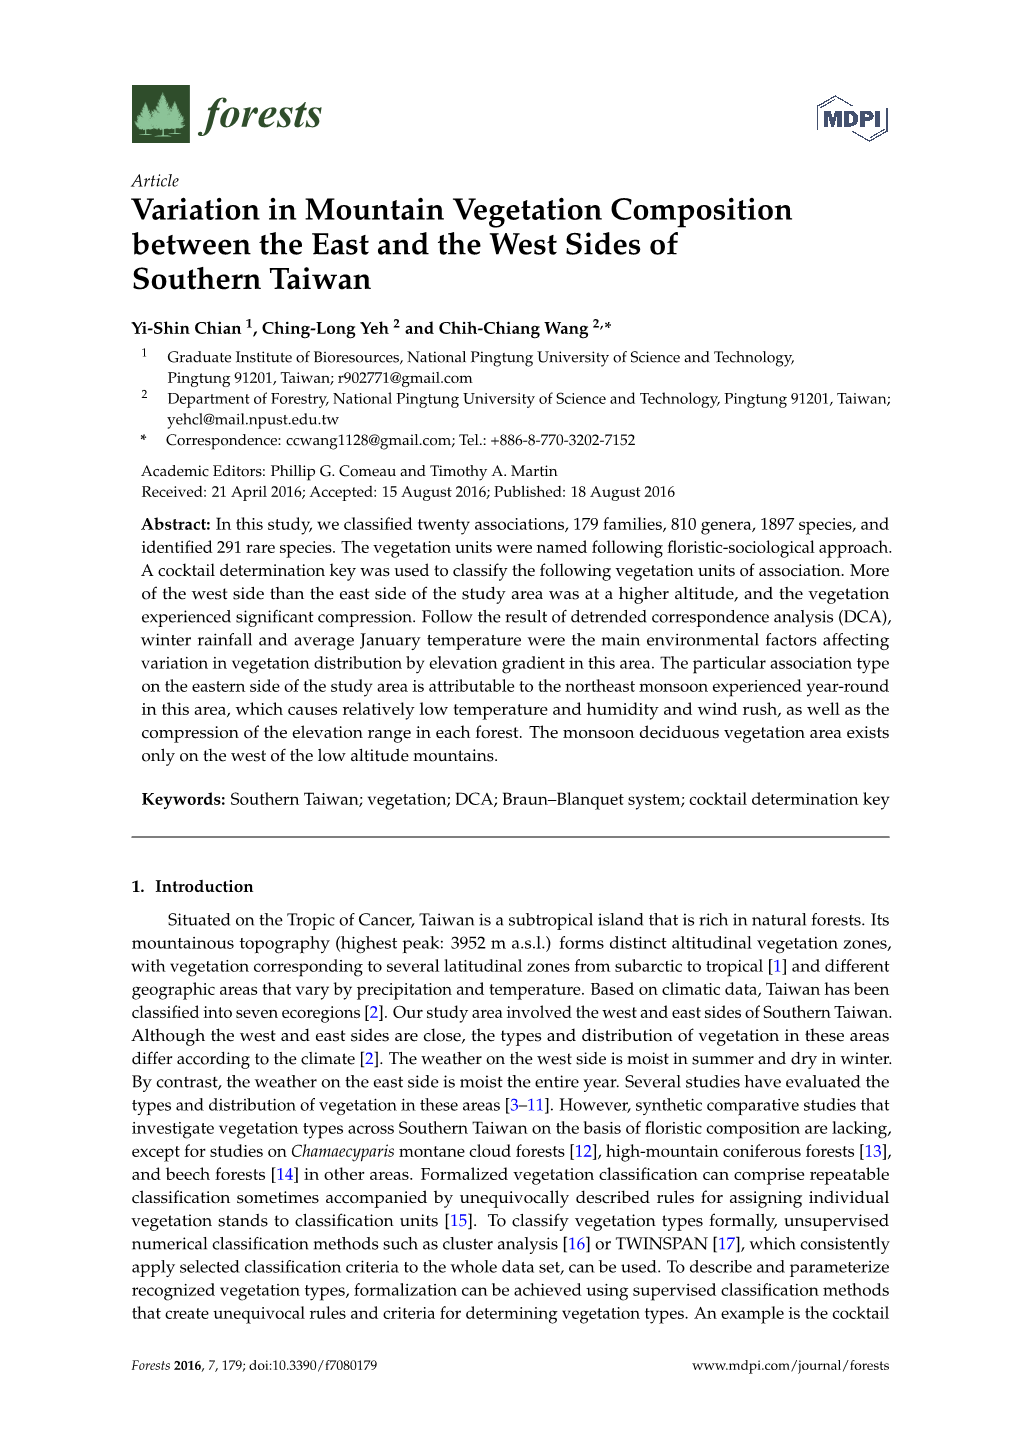 Variation in Mountain Vegetation Composition Between the East and the West Sides of Southern Taiwan